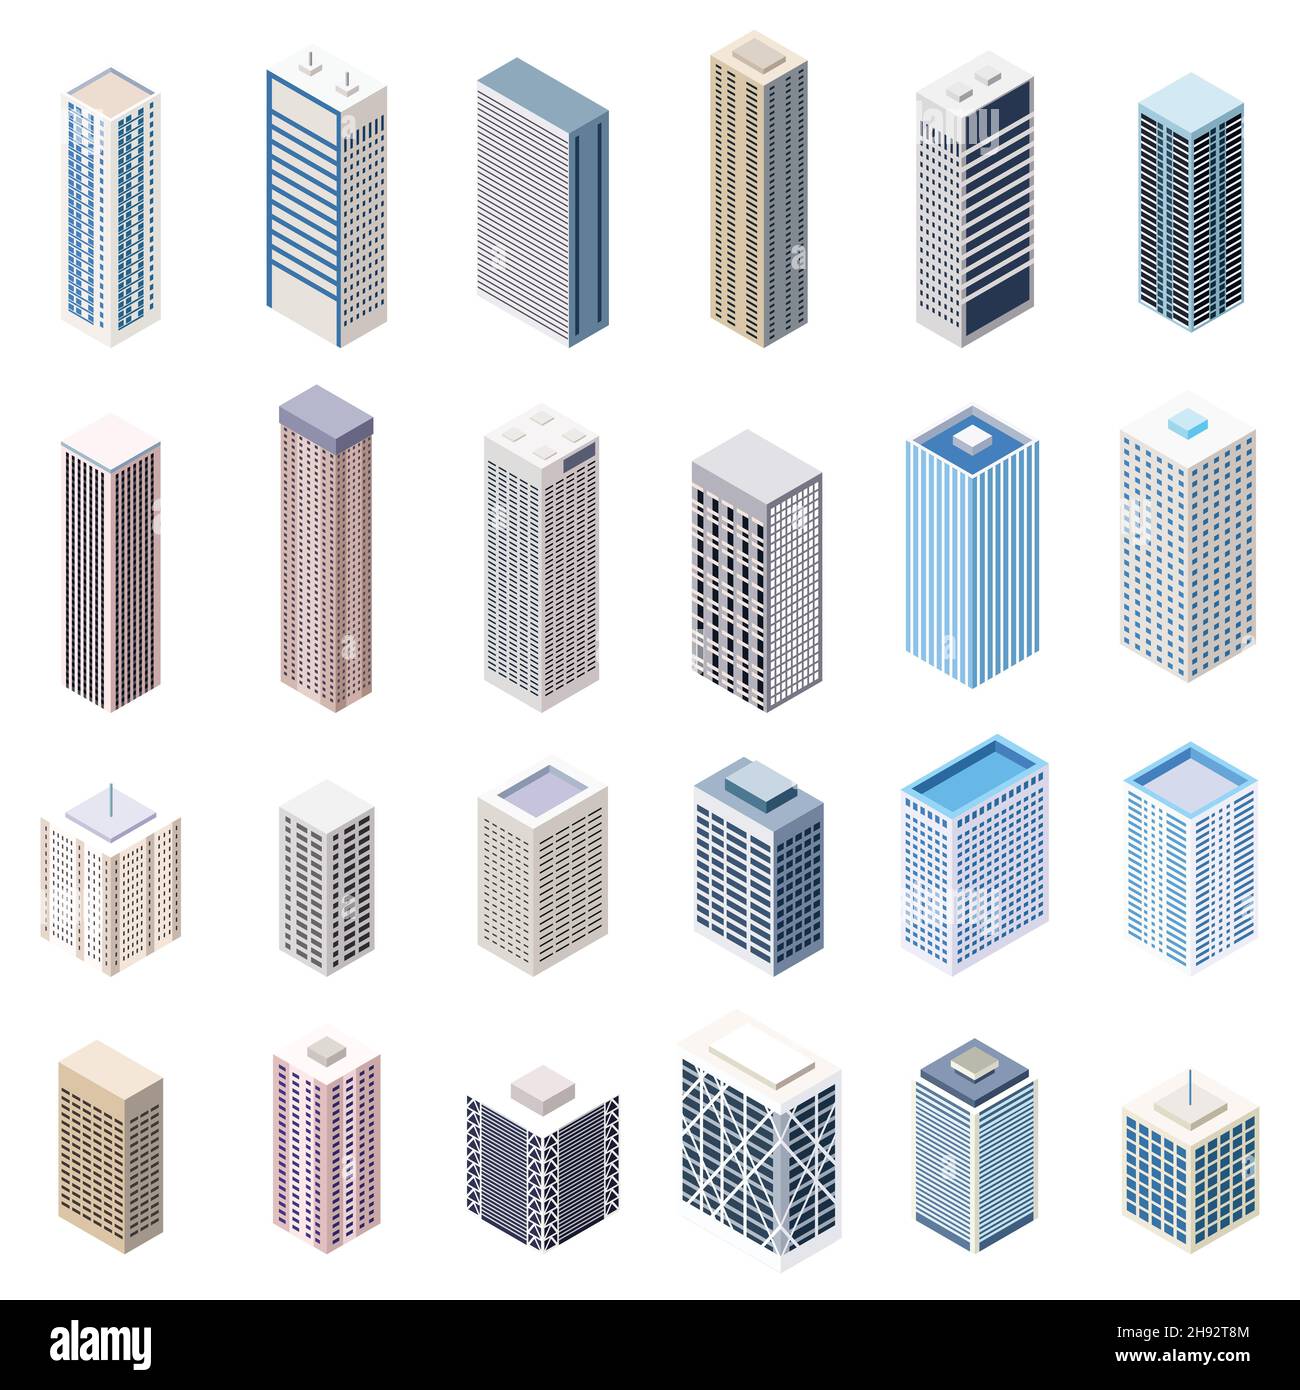 Isometric buildings vector set isolated on white background Stock Vector